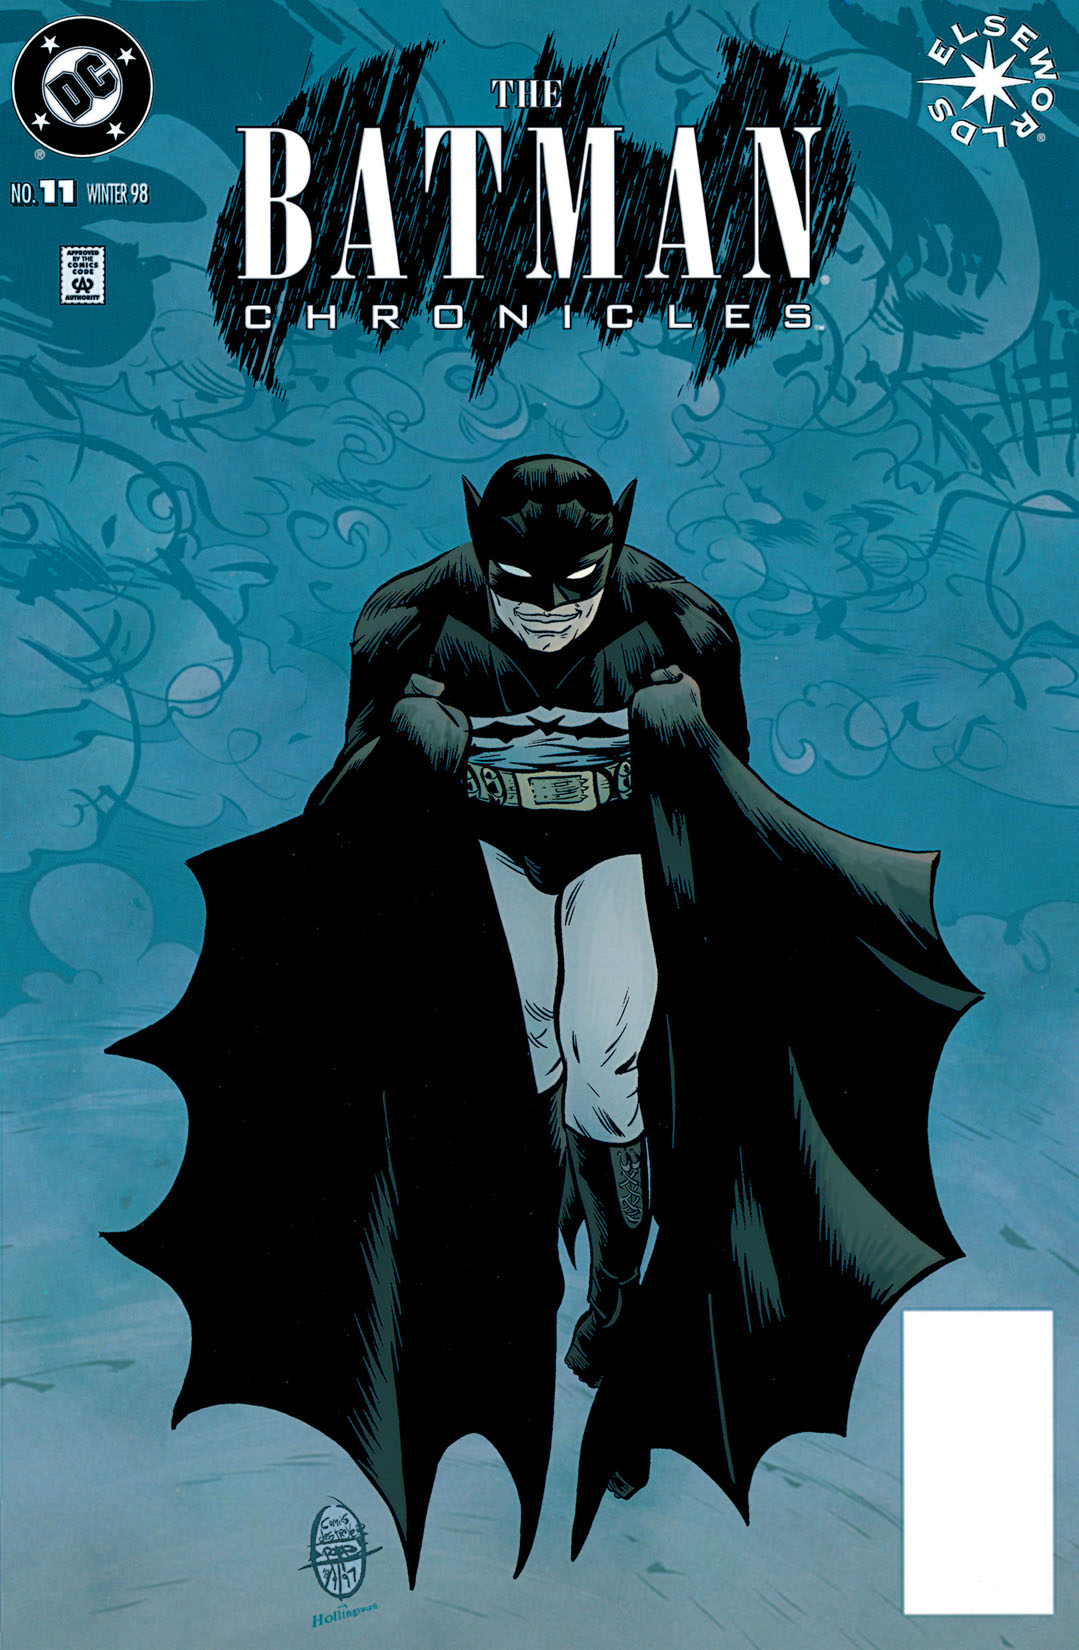 The Batman Chronicles #11 preview images